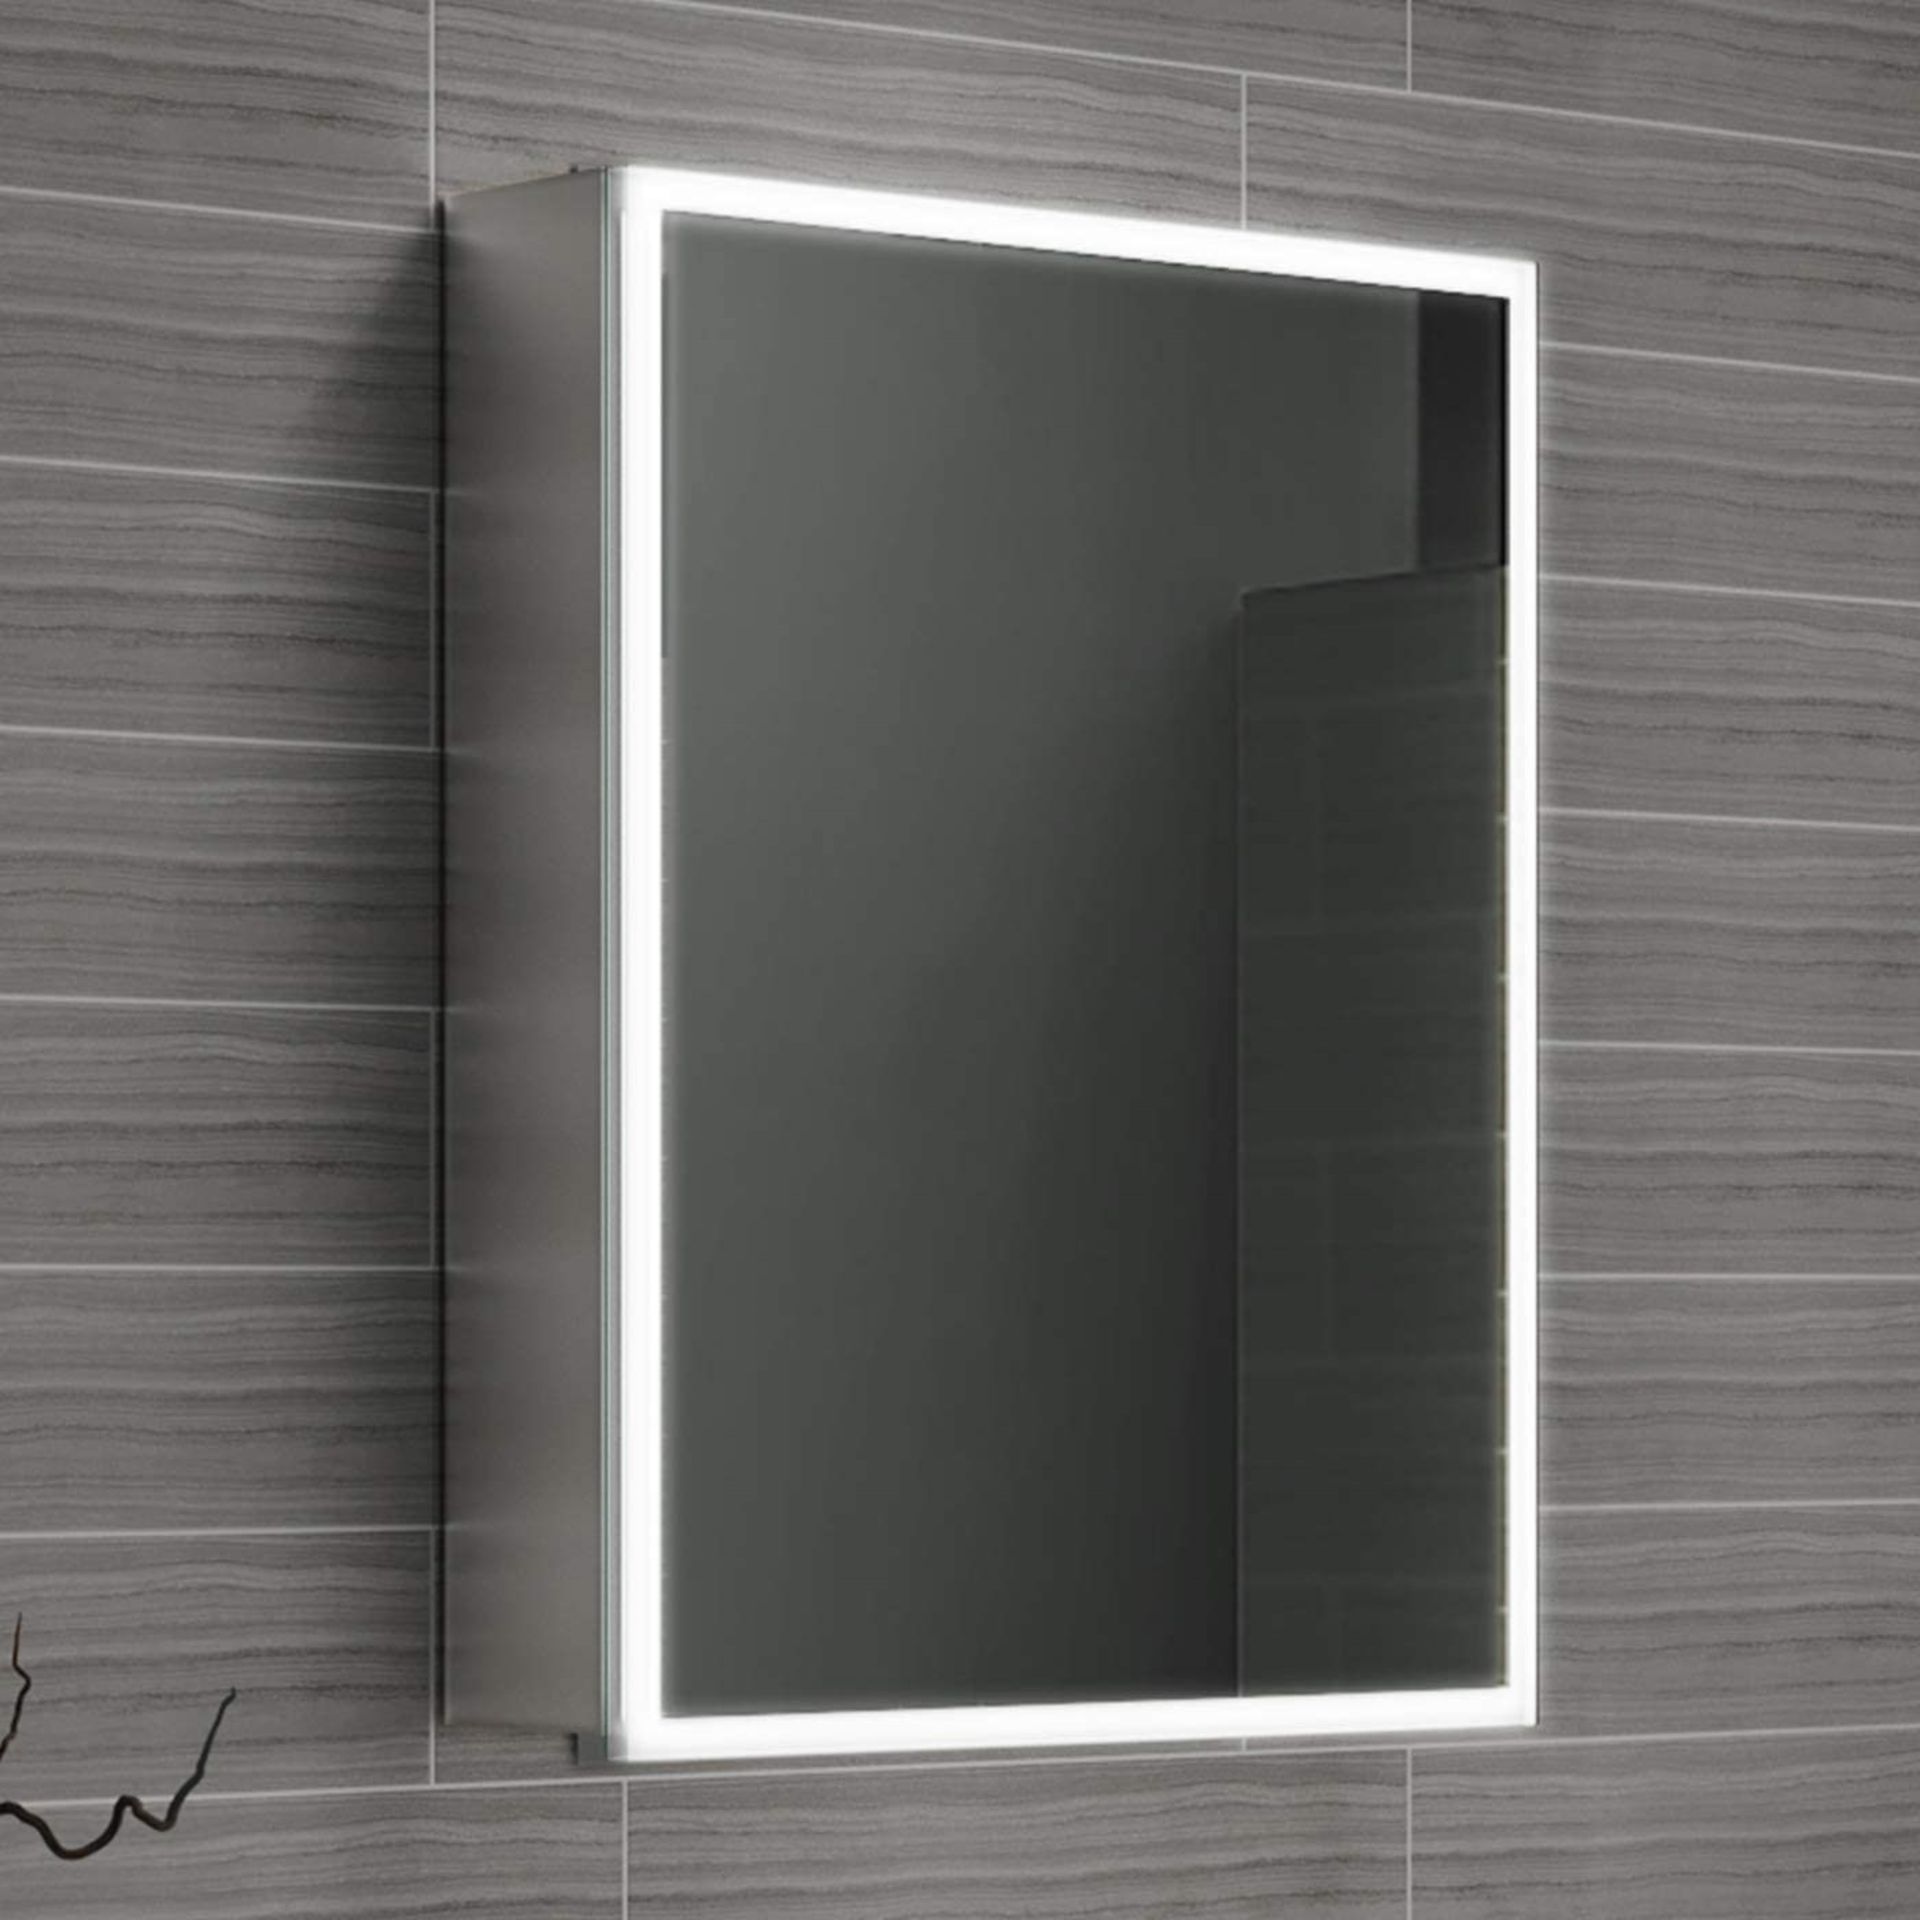 450x600 Cosmic Illuminated LED Mirror Cabinet. RRP £499.99.MC161.We love this mirror cabinet ... - Image 4 of 4